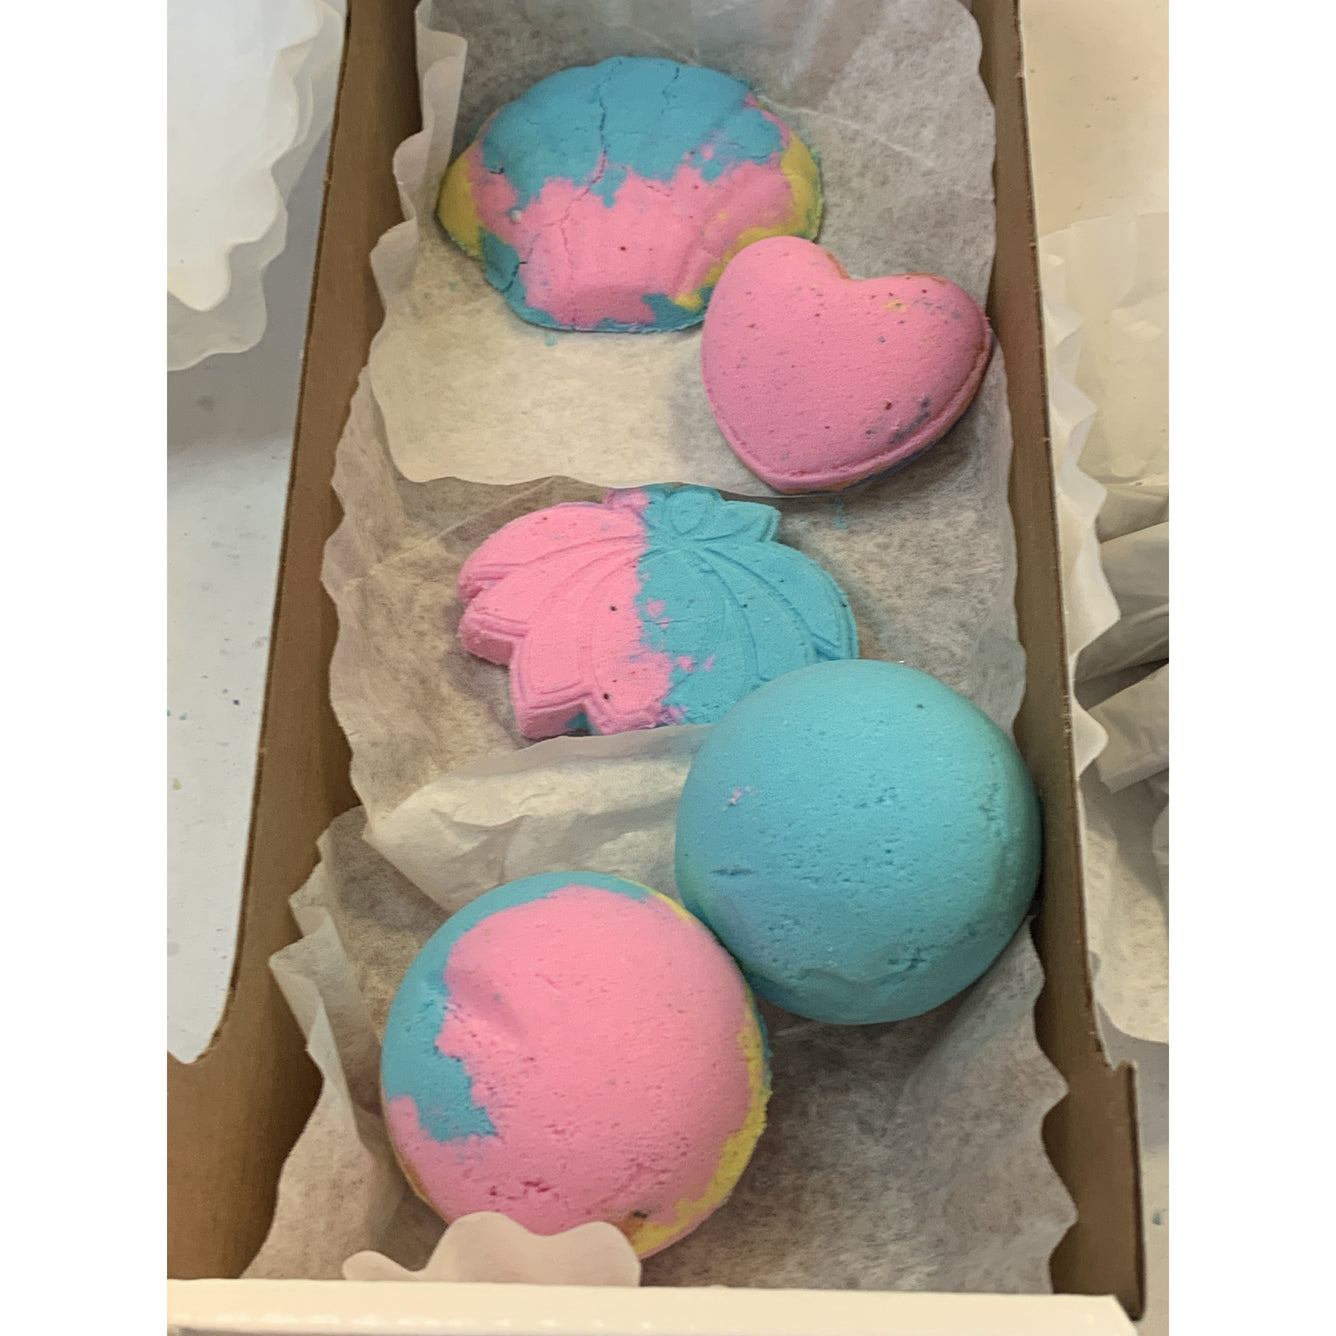 Bath Bomb Classes an excellent private gathering event for you and close family or friends! Sugared Mango Soaps